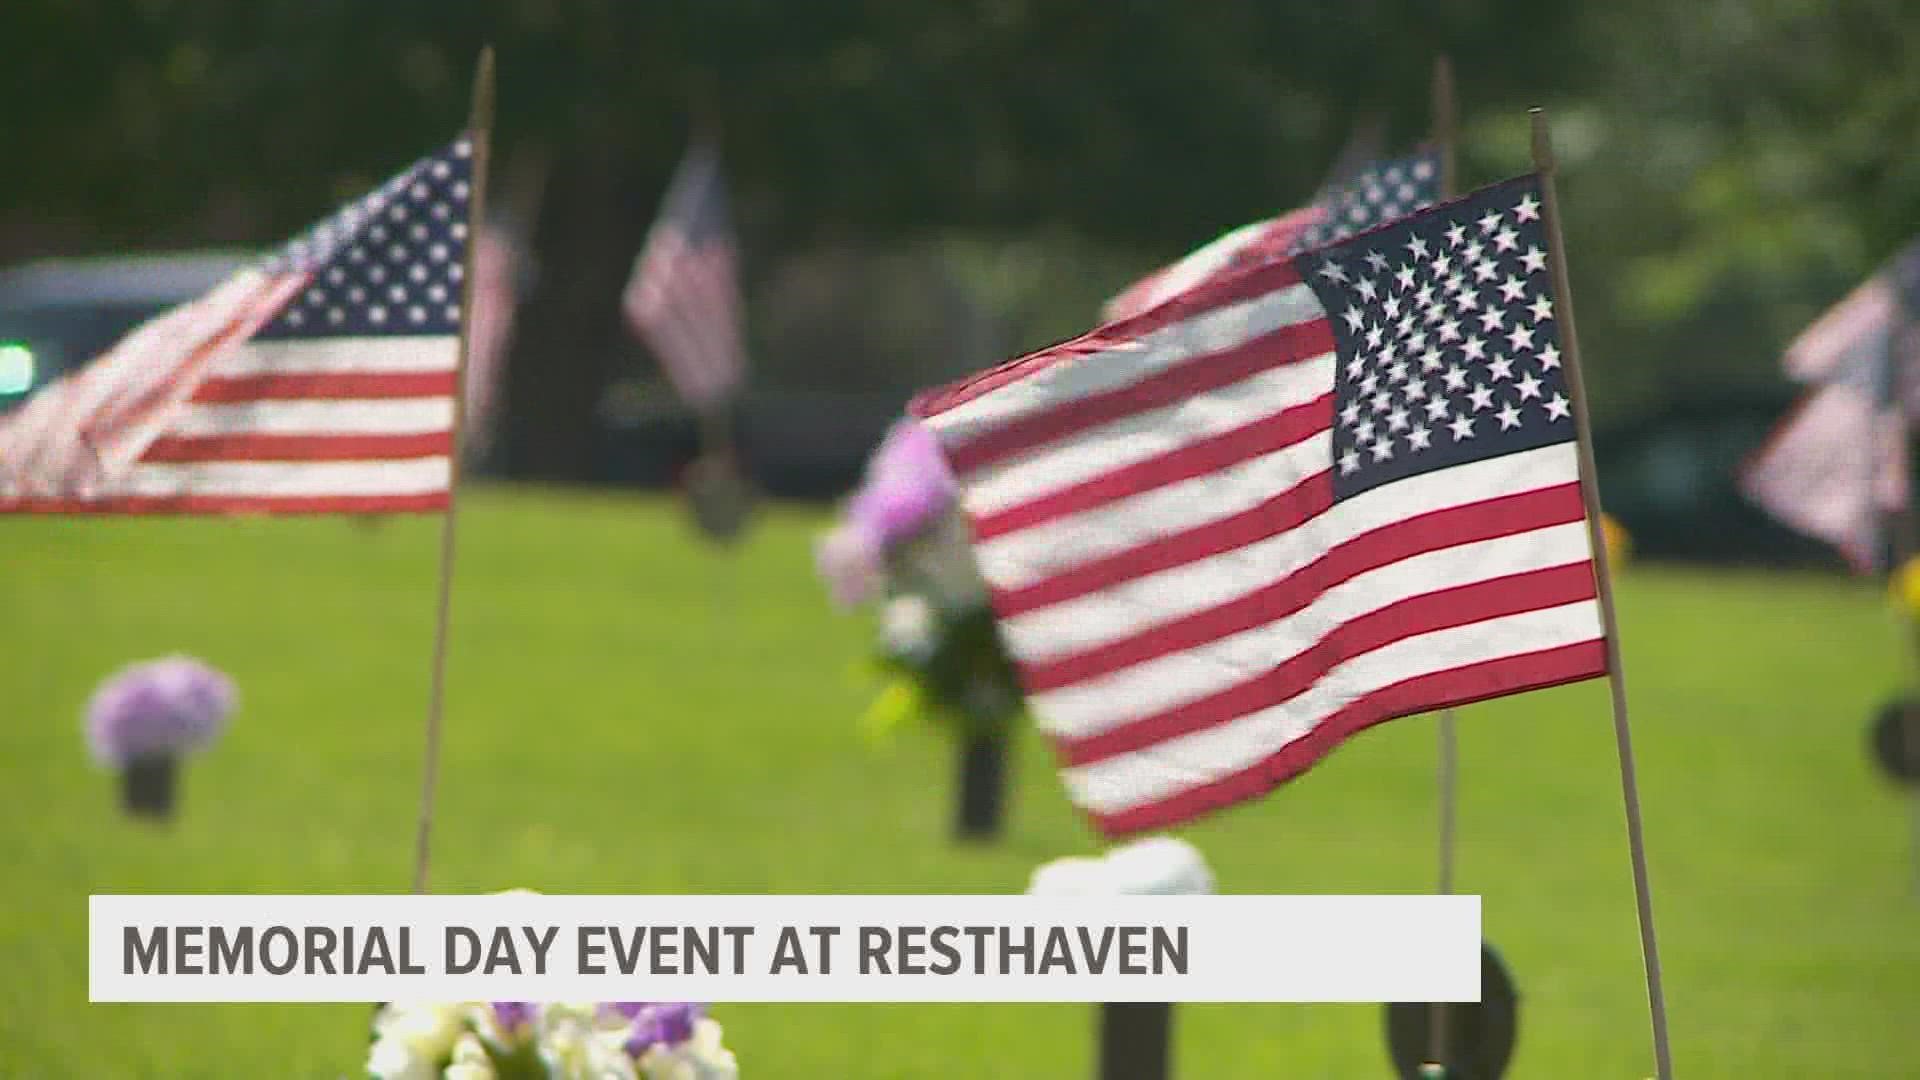 From the Iowa Capitol to Resthaven cemetery, Iowans across the state honored the fallen on this year's Memorial Day